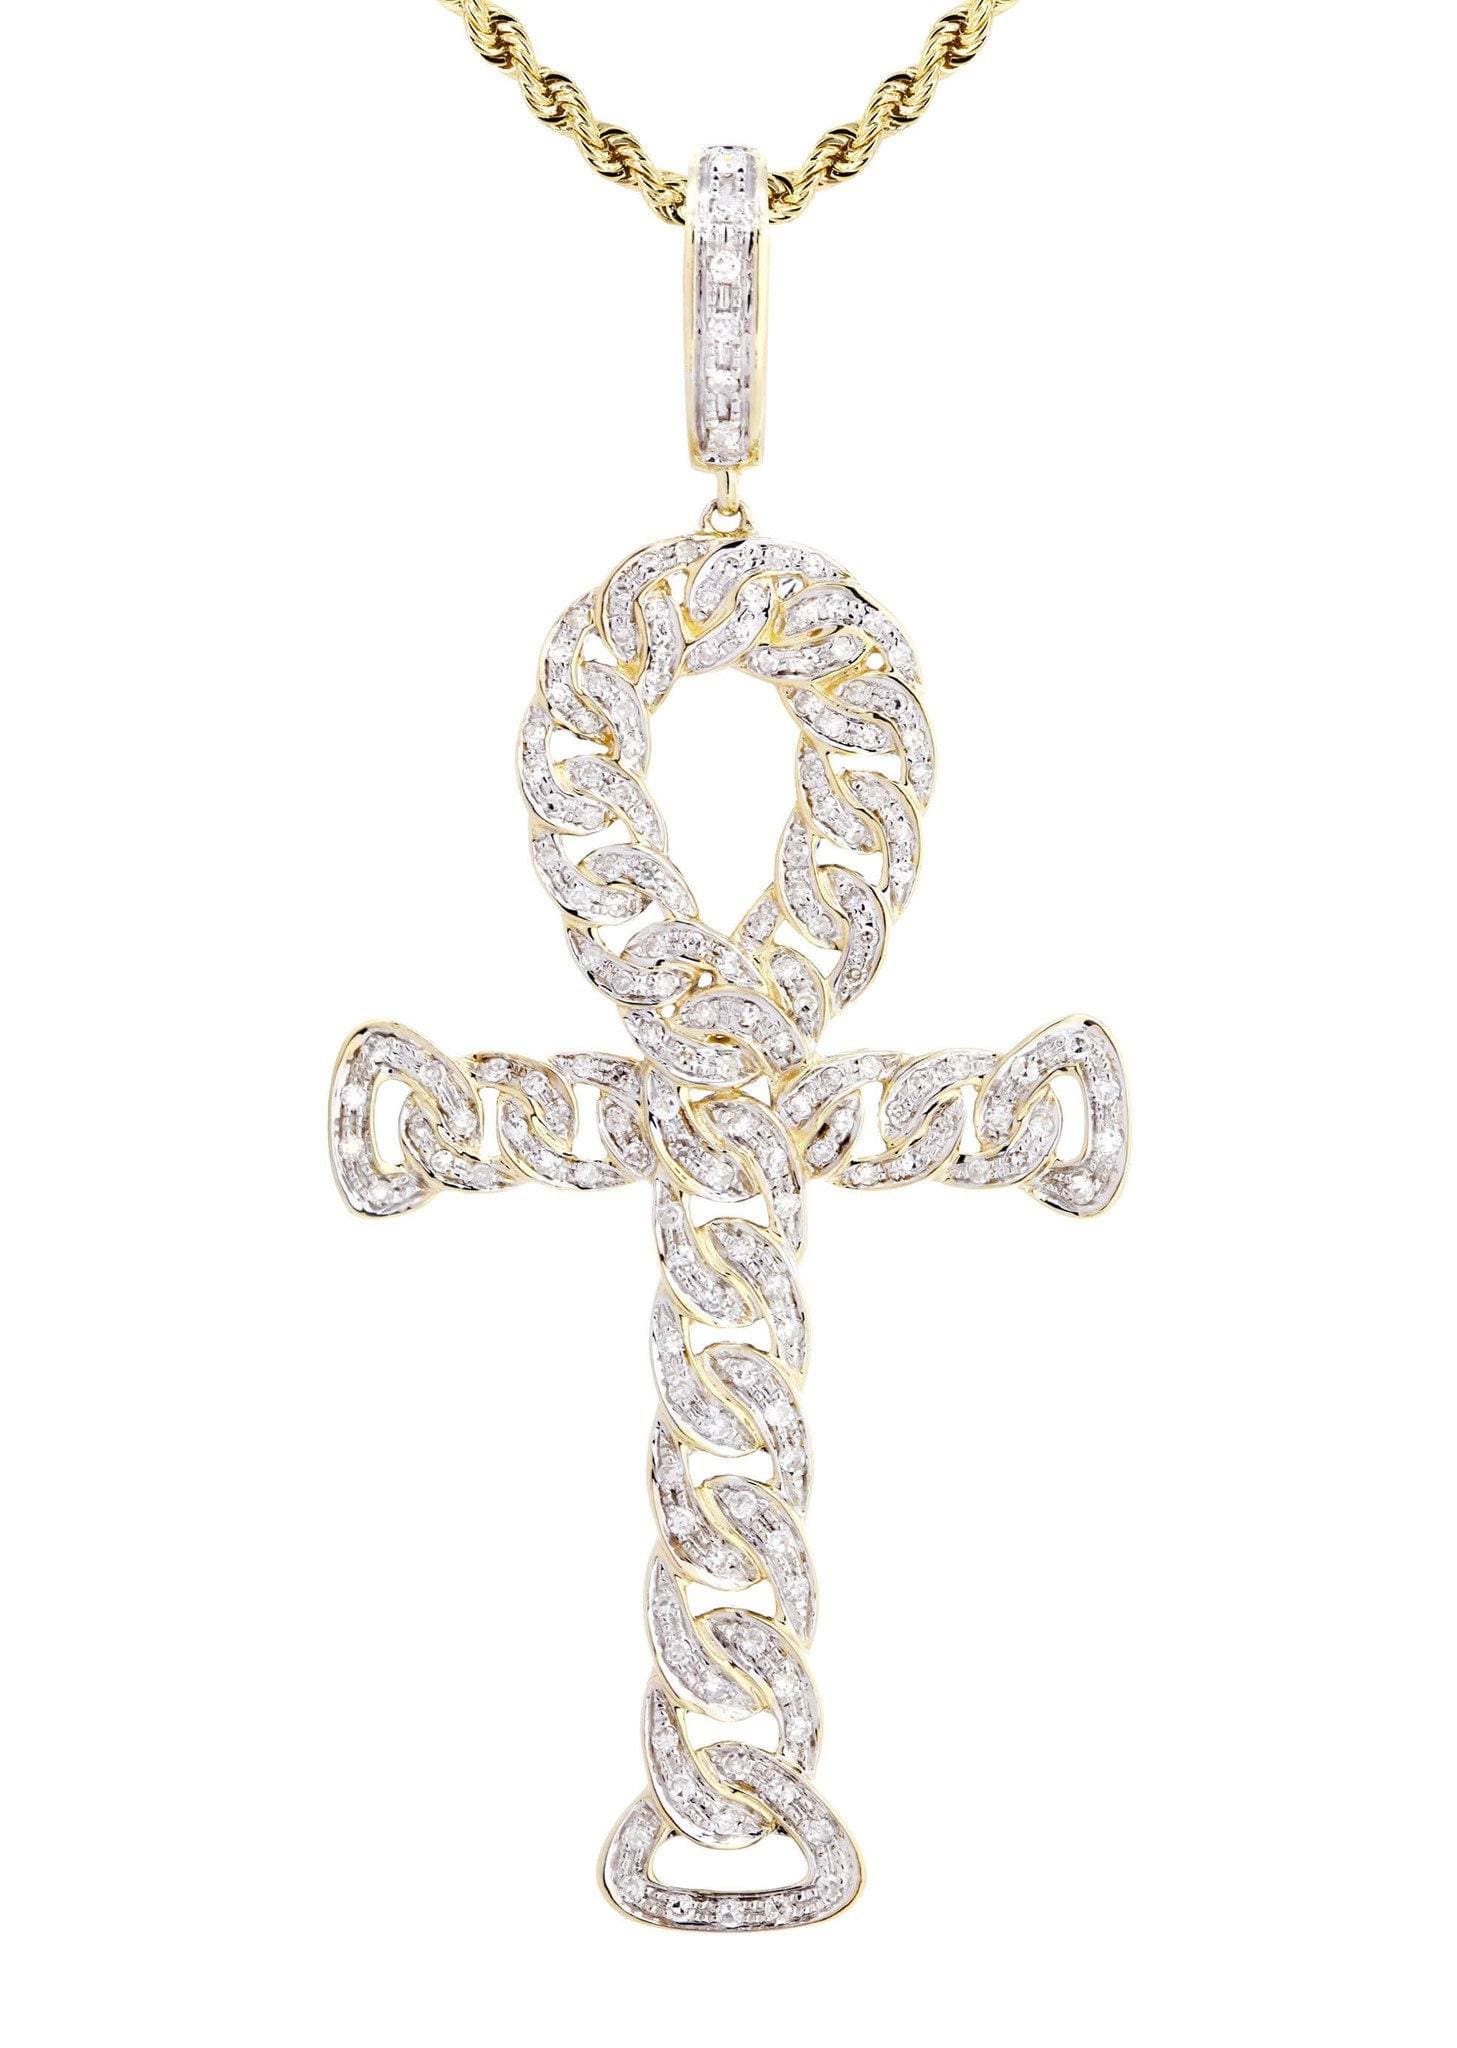 10K Yellow Gold Ankh Diamond Pendant & Rope Chain | 0.79 Carats – FrostNYC